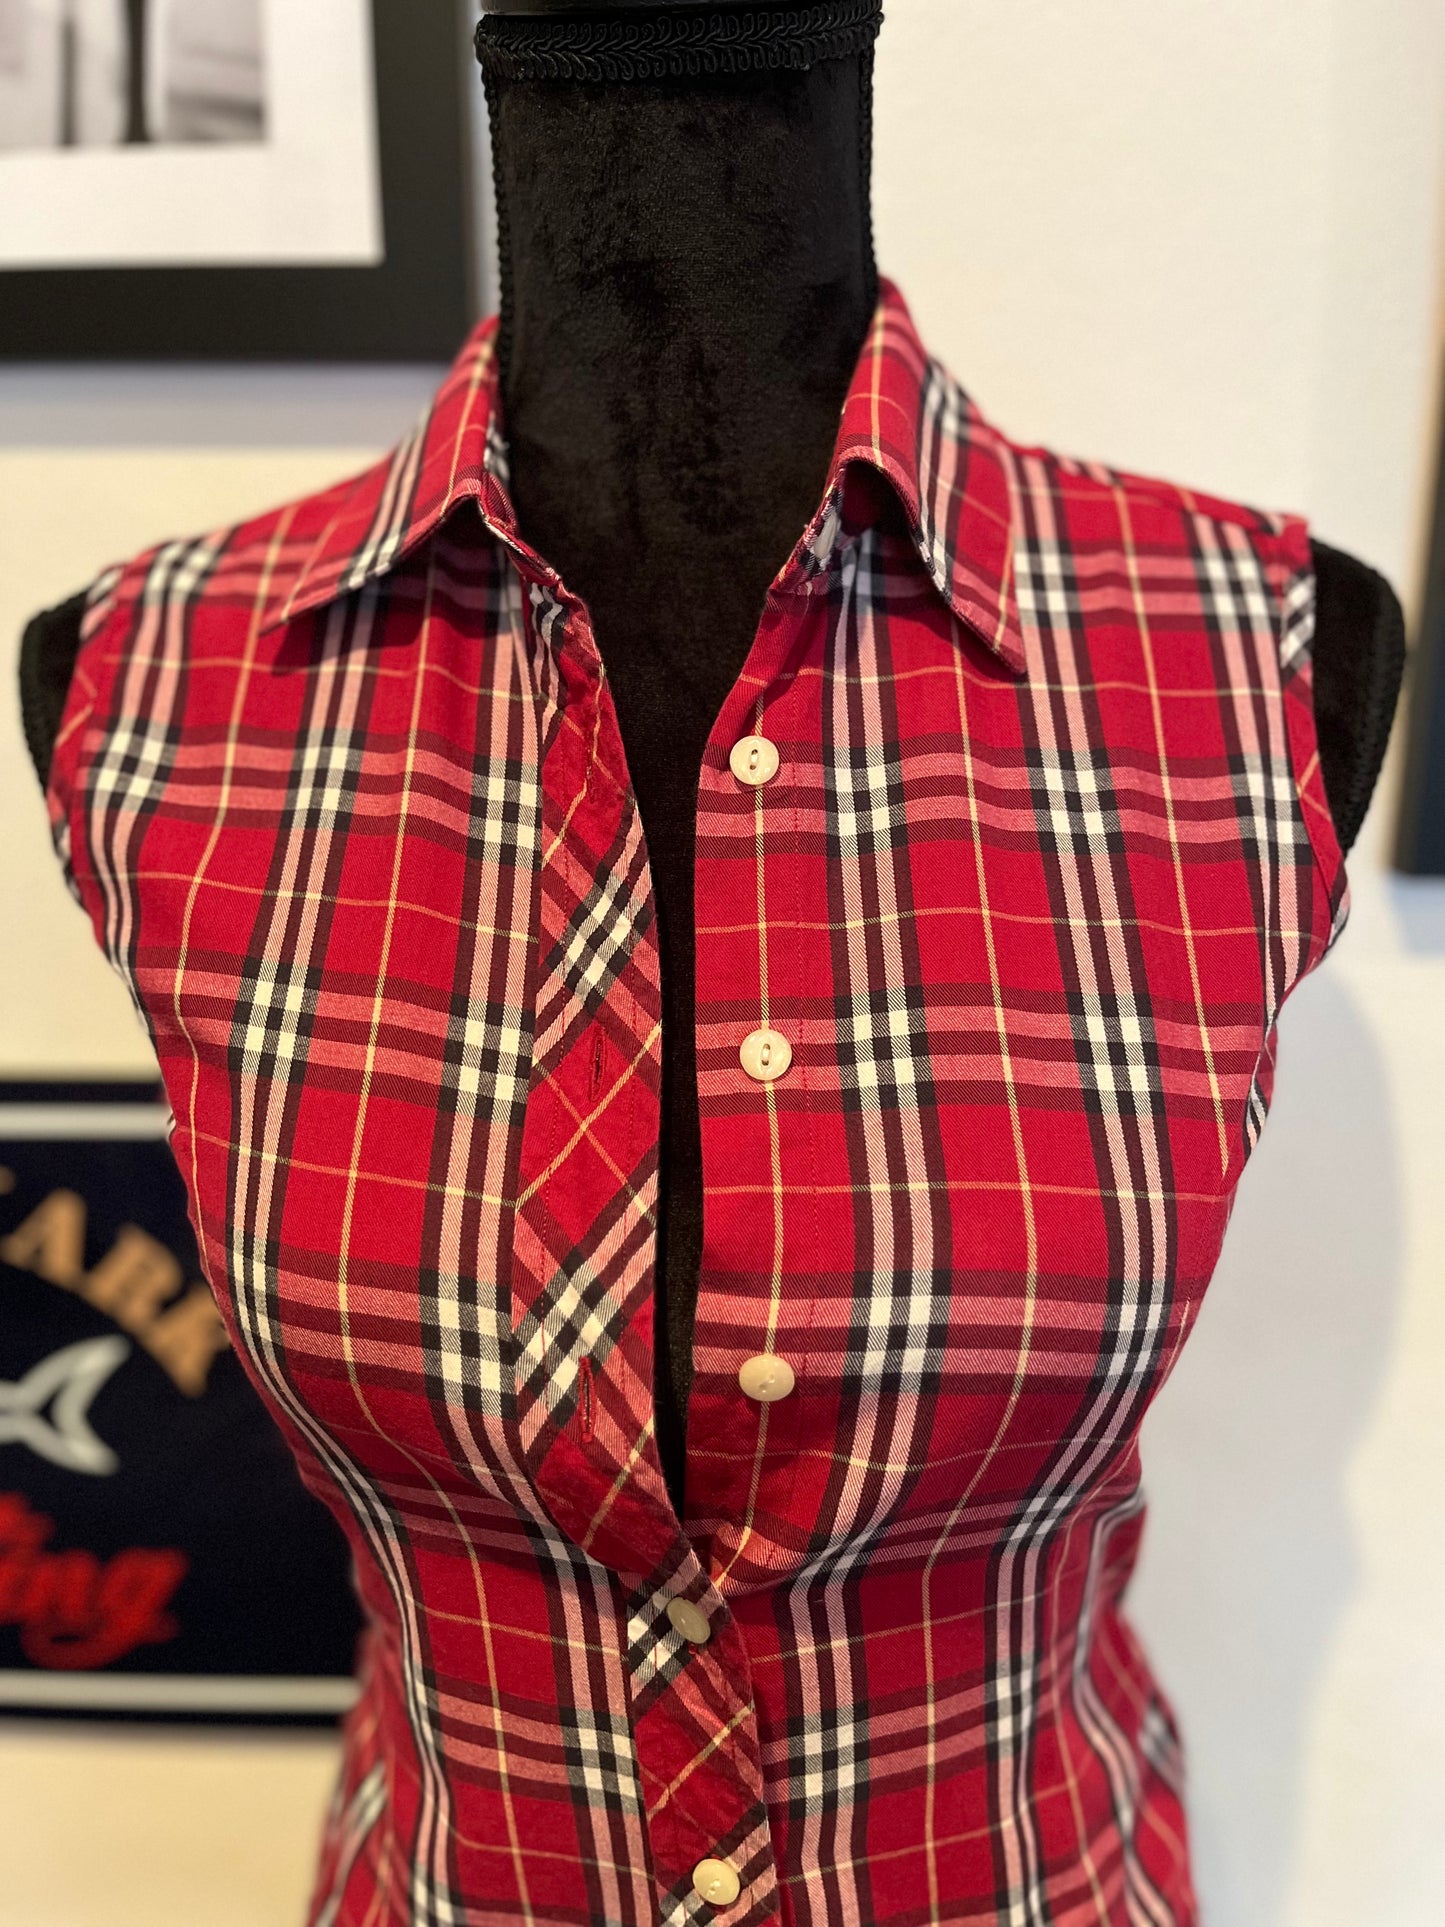 Burberry 100% Cotton Women’s Sleeveless Red Check Shirt Size Small